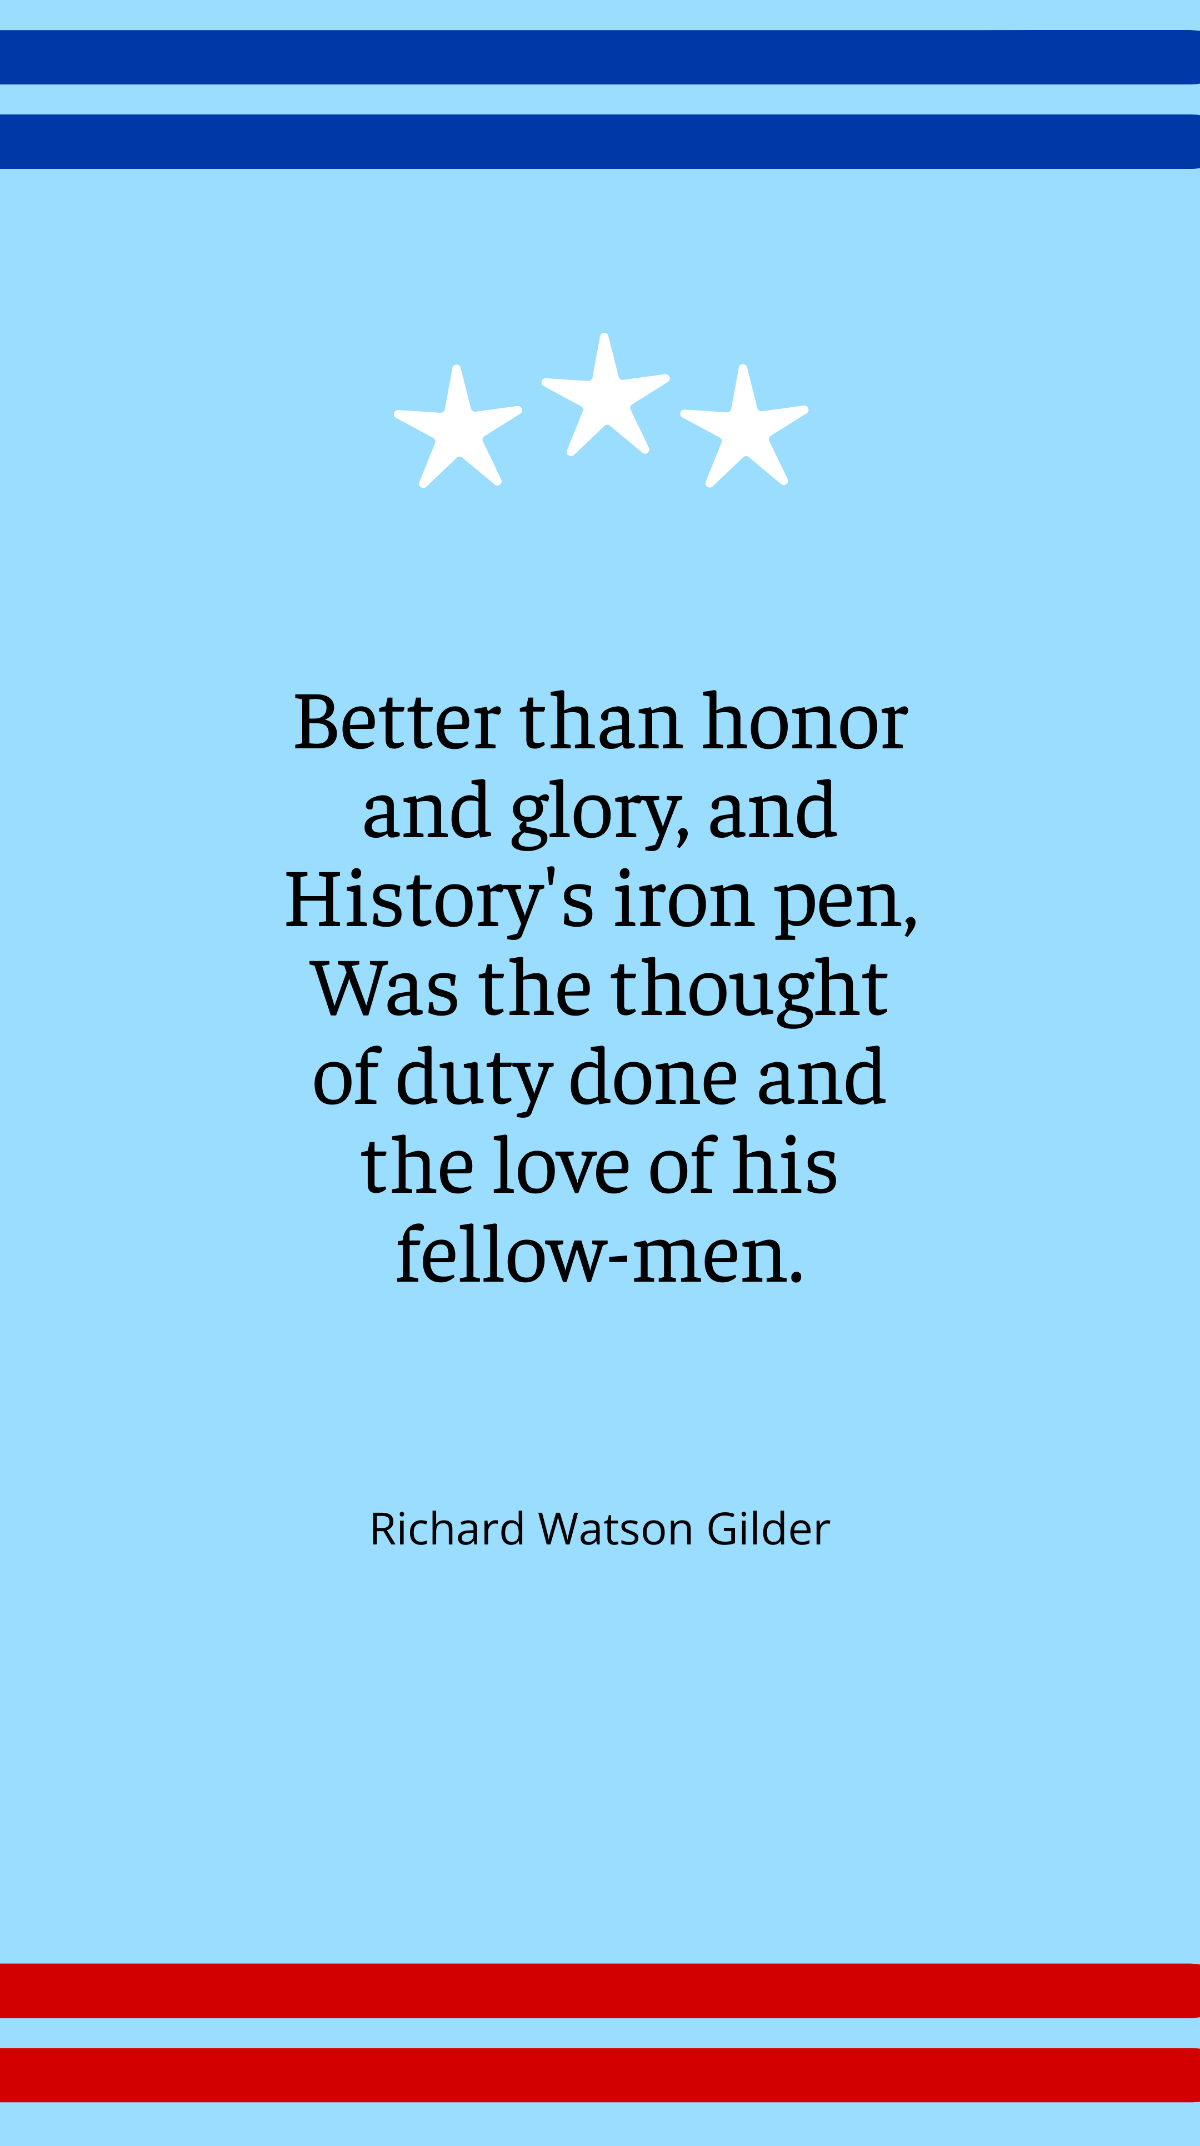 Richard Watson Gilder - Better than honor and glory, and History's iron pen, Was the thought of duty done and the love of his fellow-men. Template